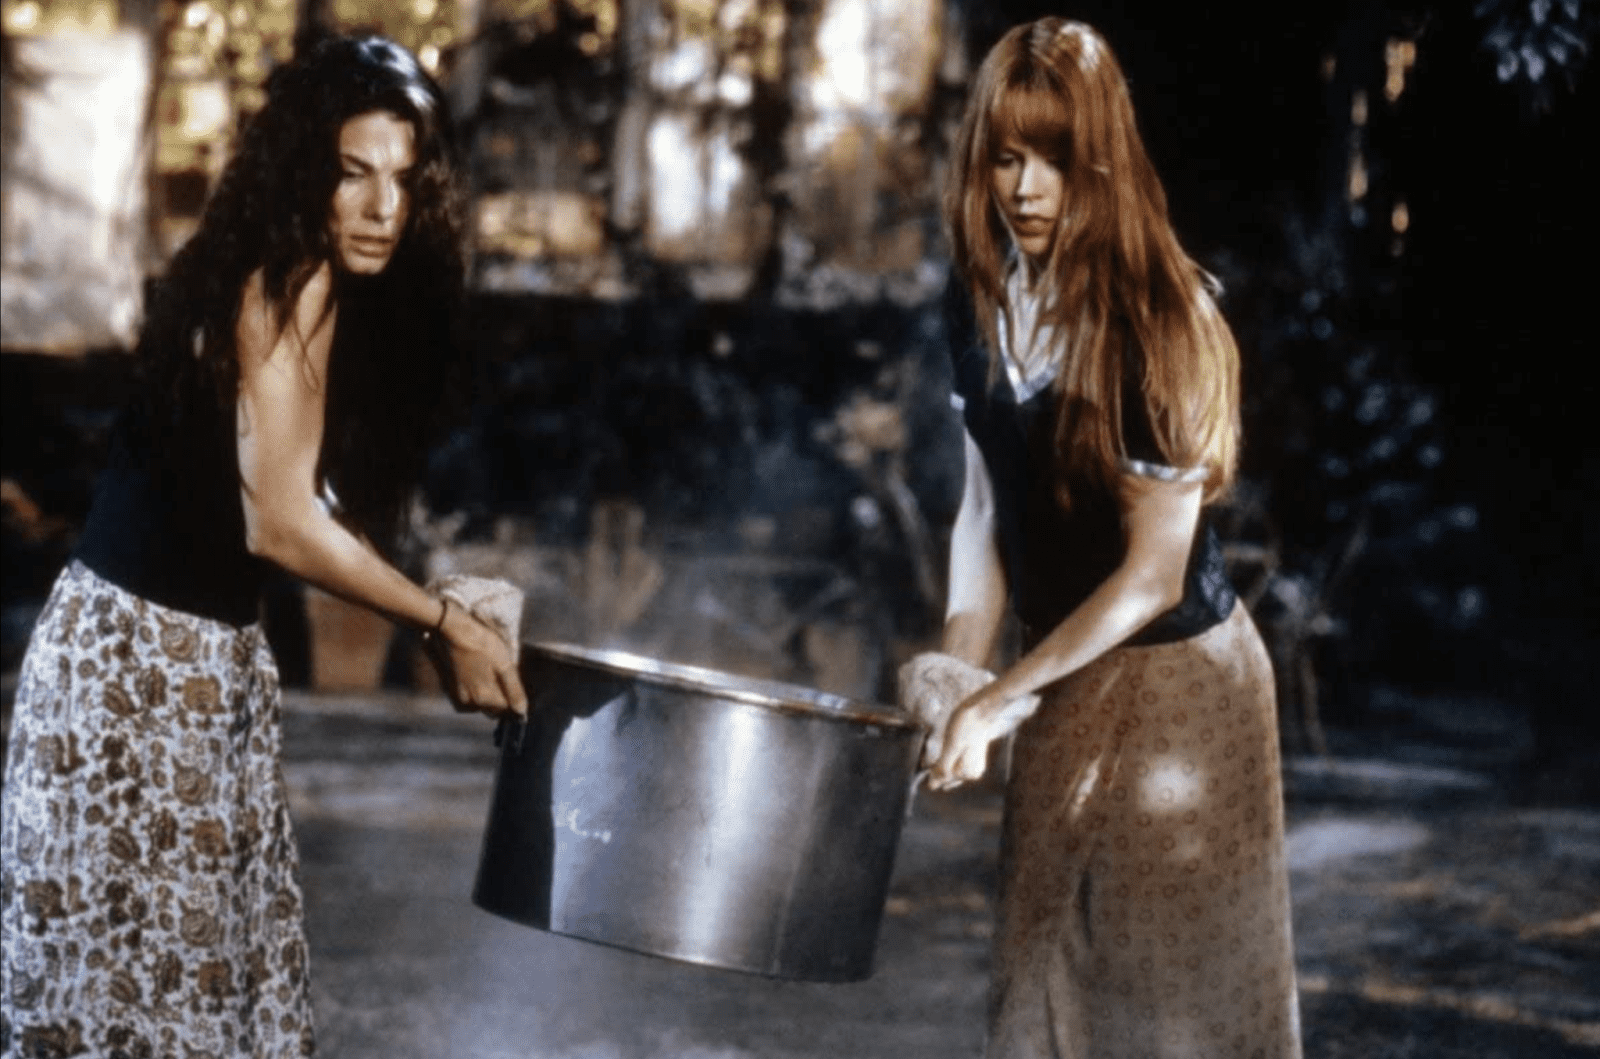 Two sisters carry a large pot in this image from Stargate Studios.